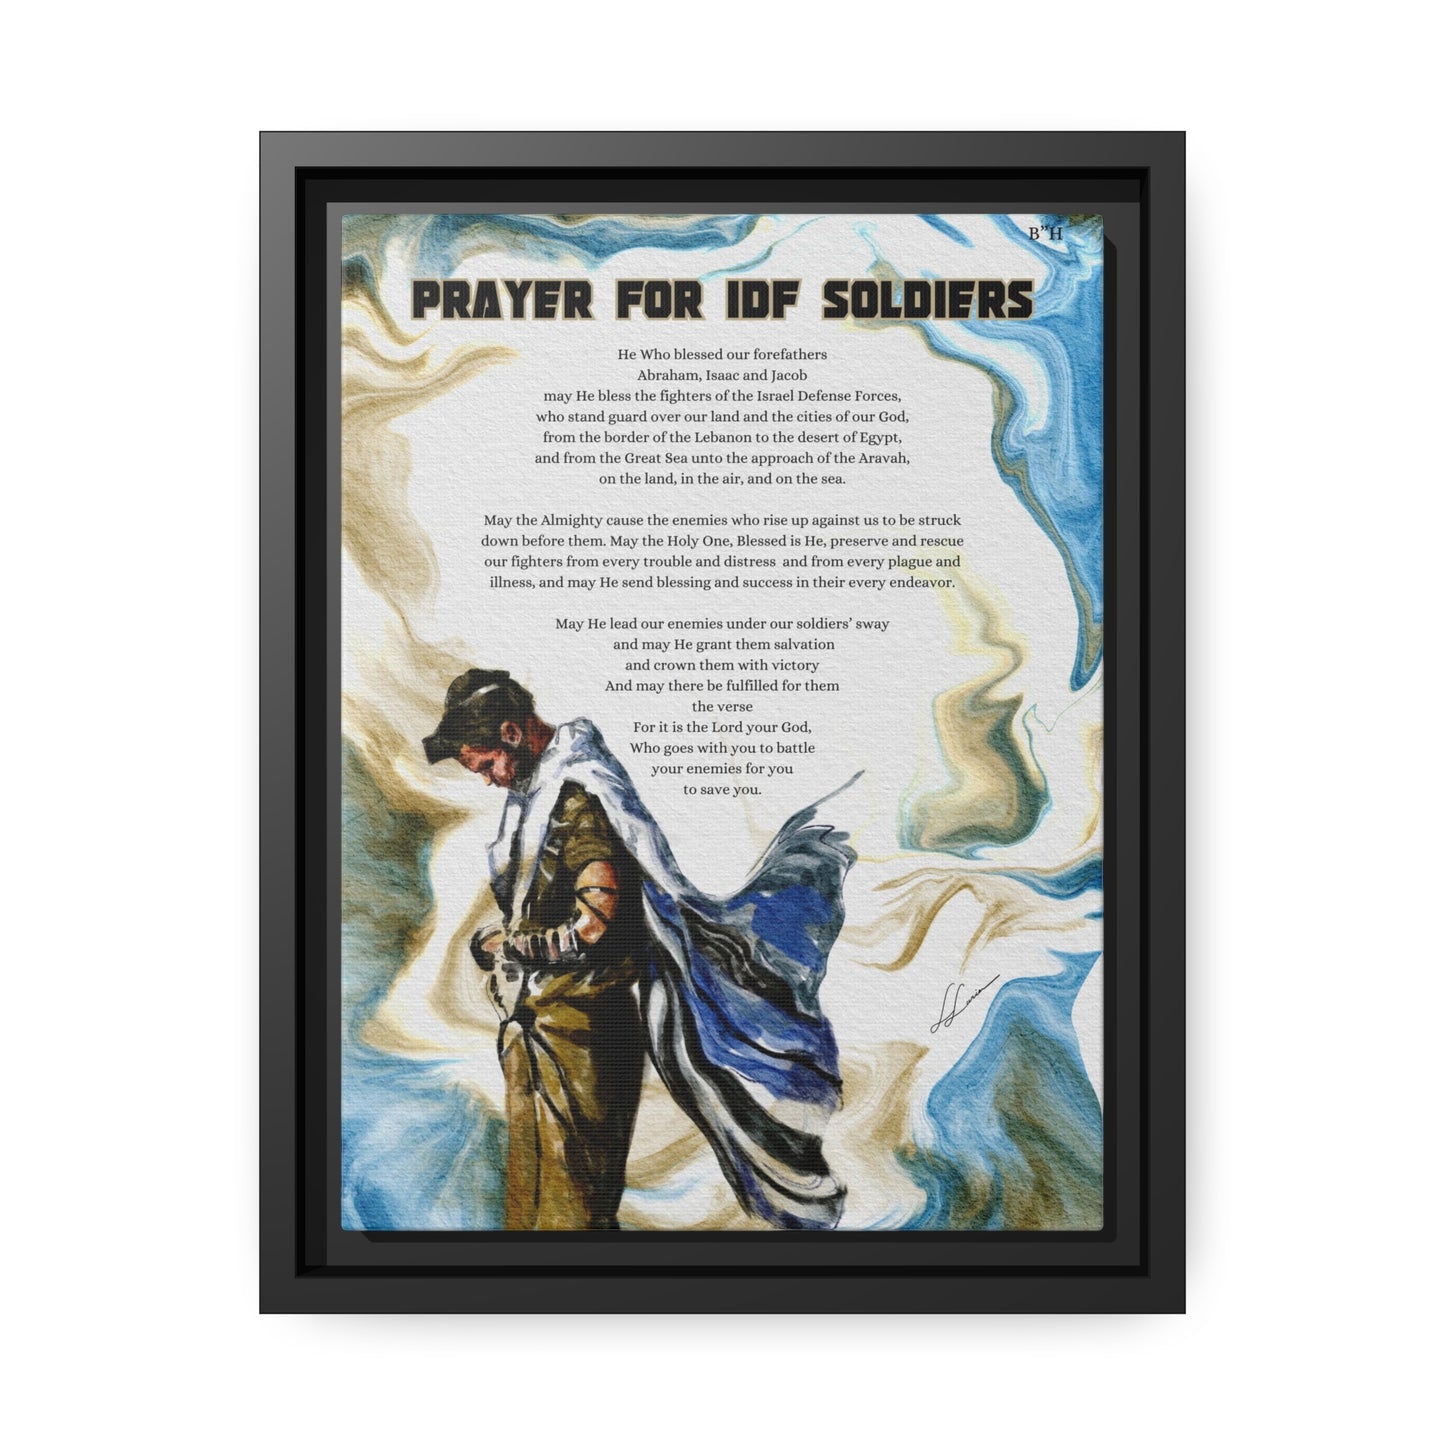 Prayer for IDF Soldiers by Leah Luria (English) -  Framed Canvas Print